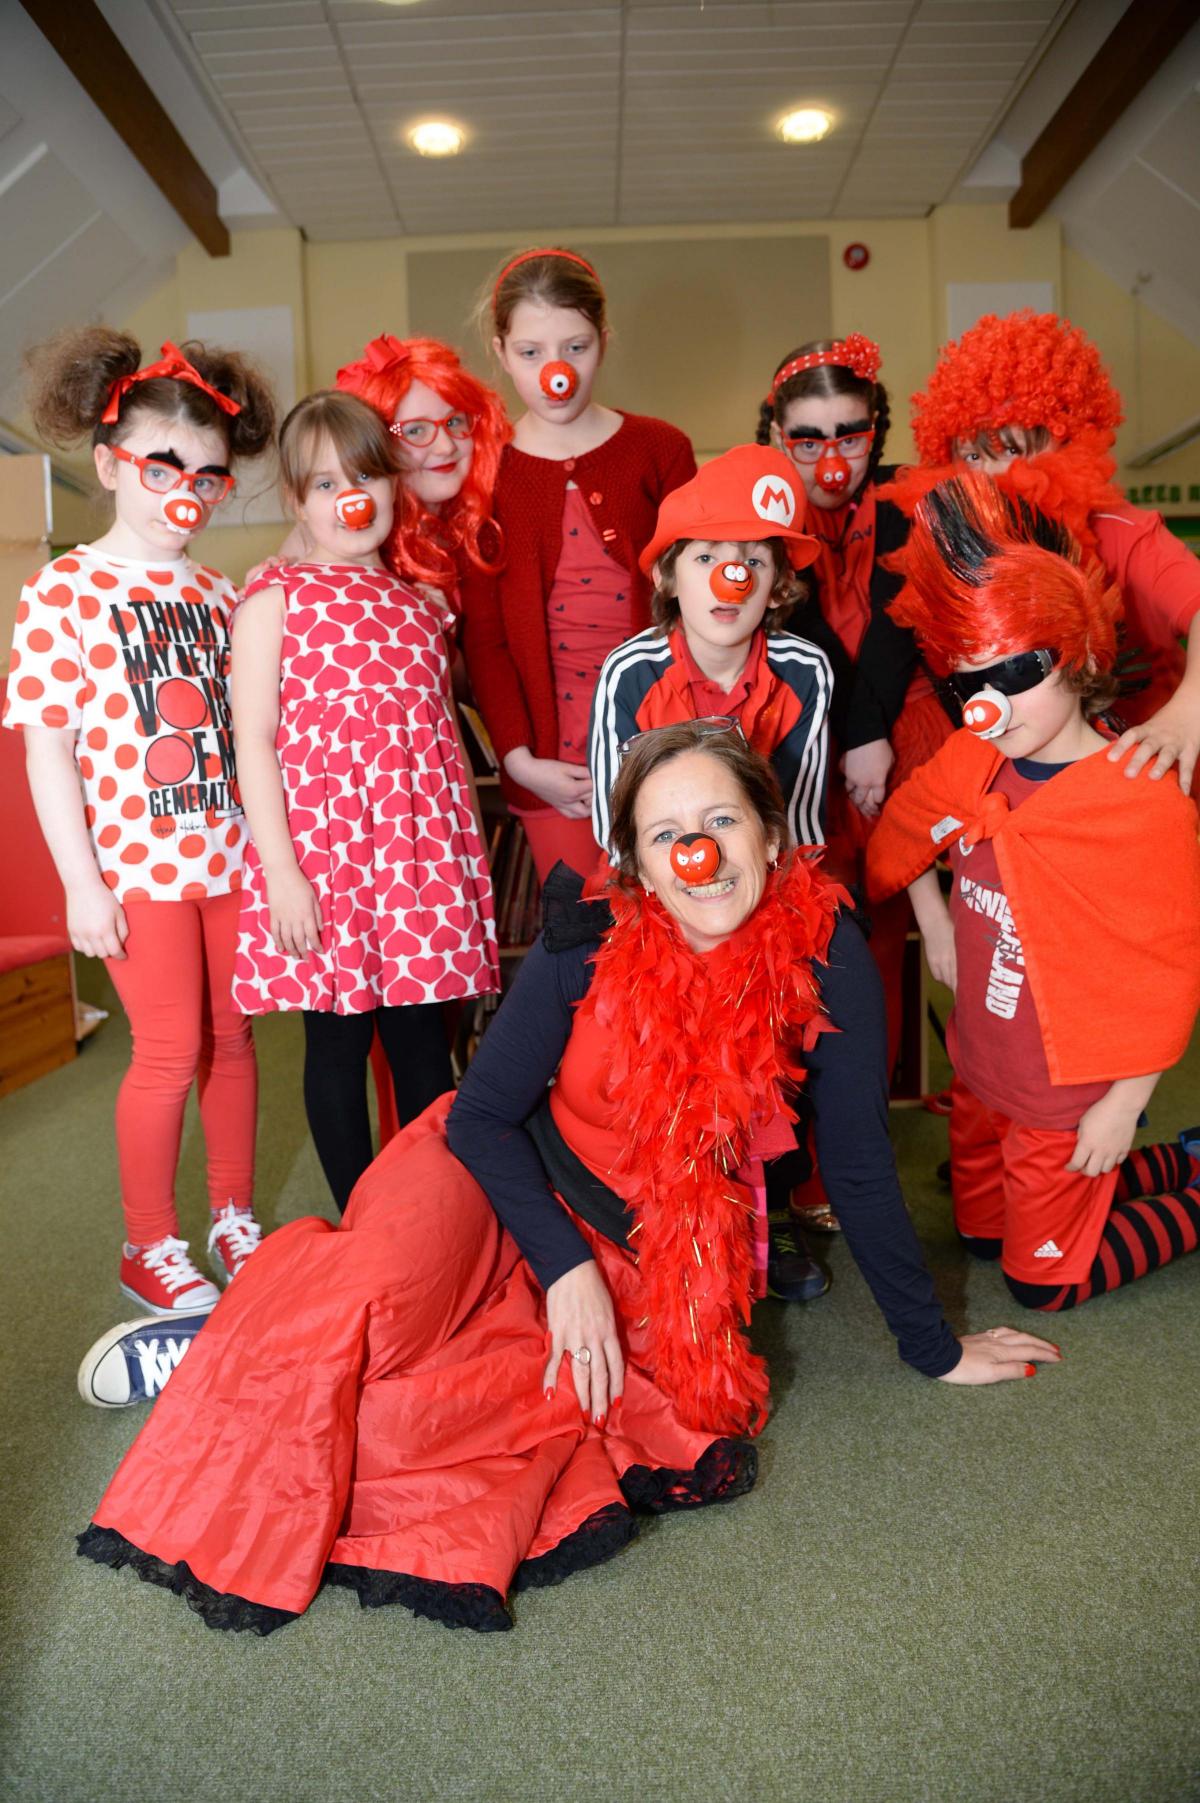 Bridport Primary school head teacher Debbie Brown joins key stage 2 pupils for Red Nose Day 2015